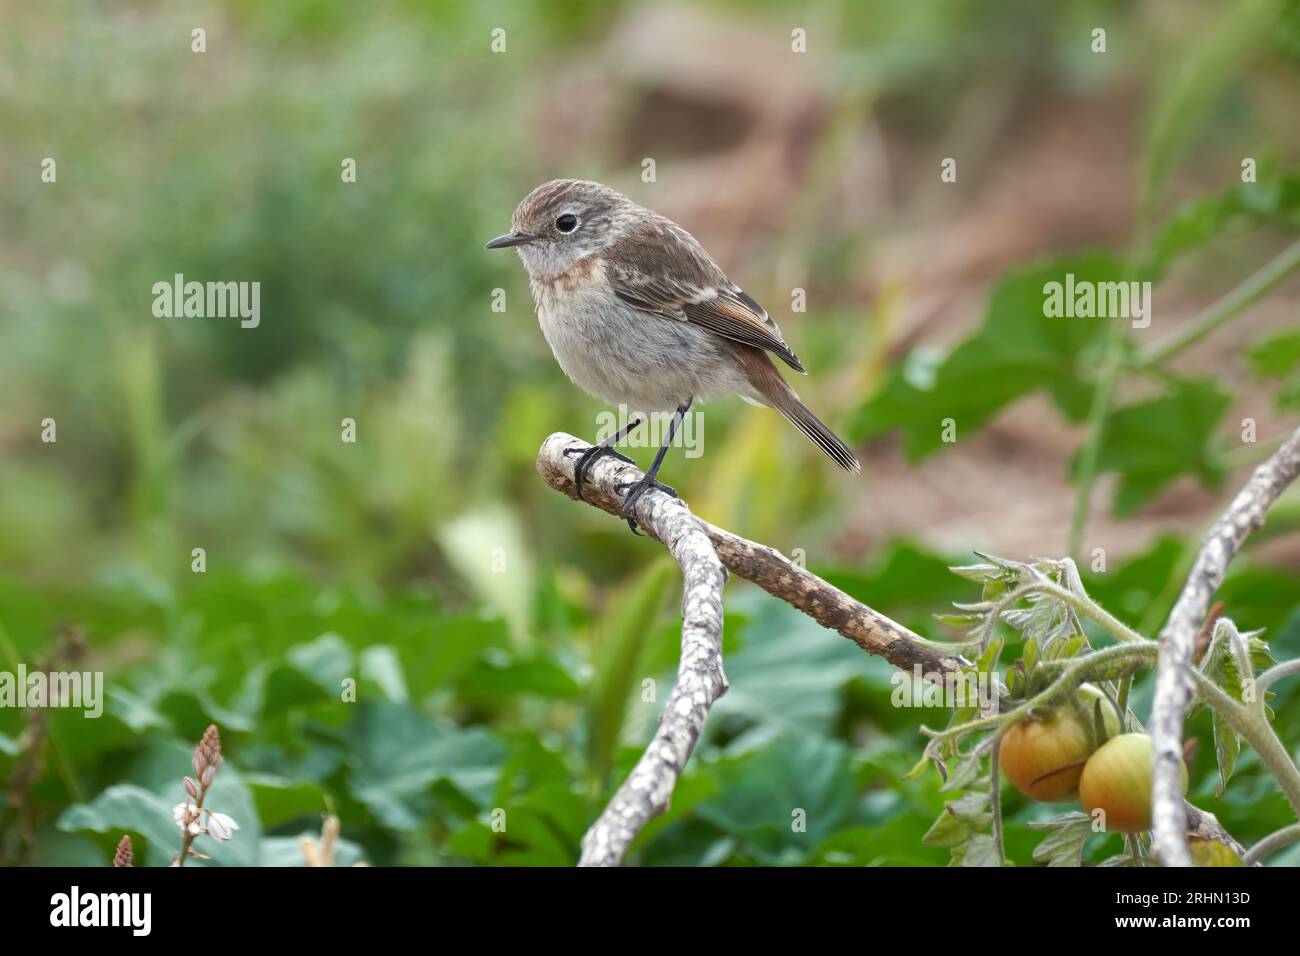 Canary Islands stonechat (Saxicola dacotiae) female in a garden with tomato plants in Fuerteventura Stock Photo